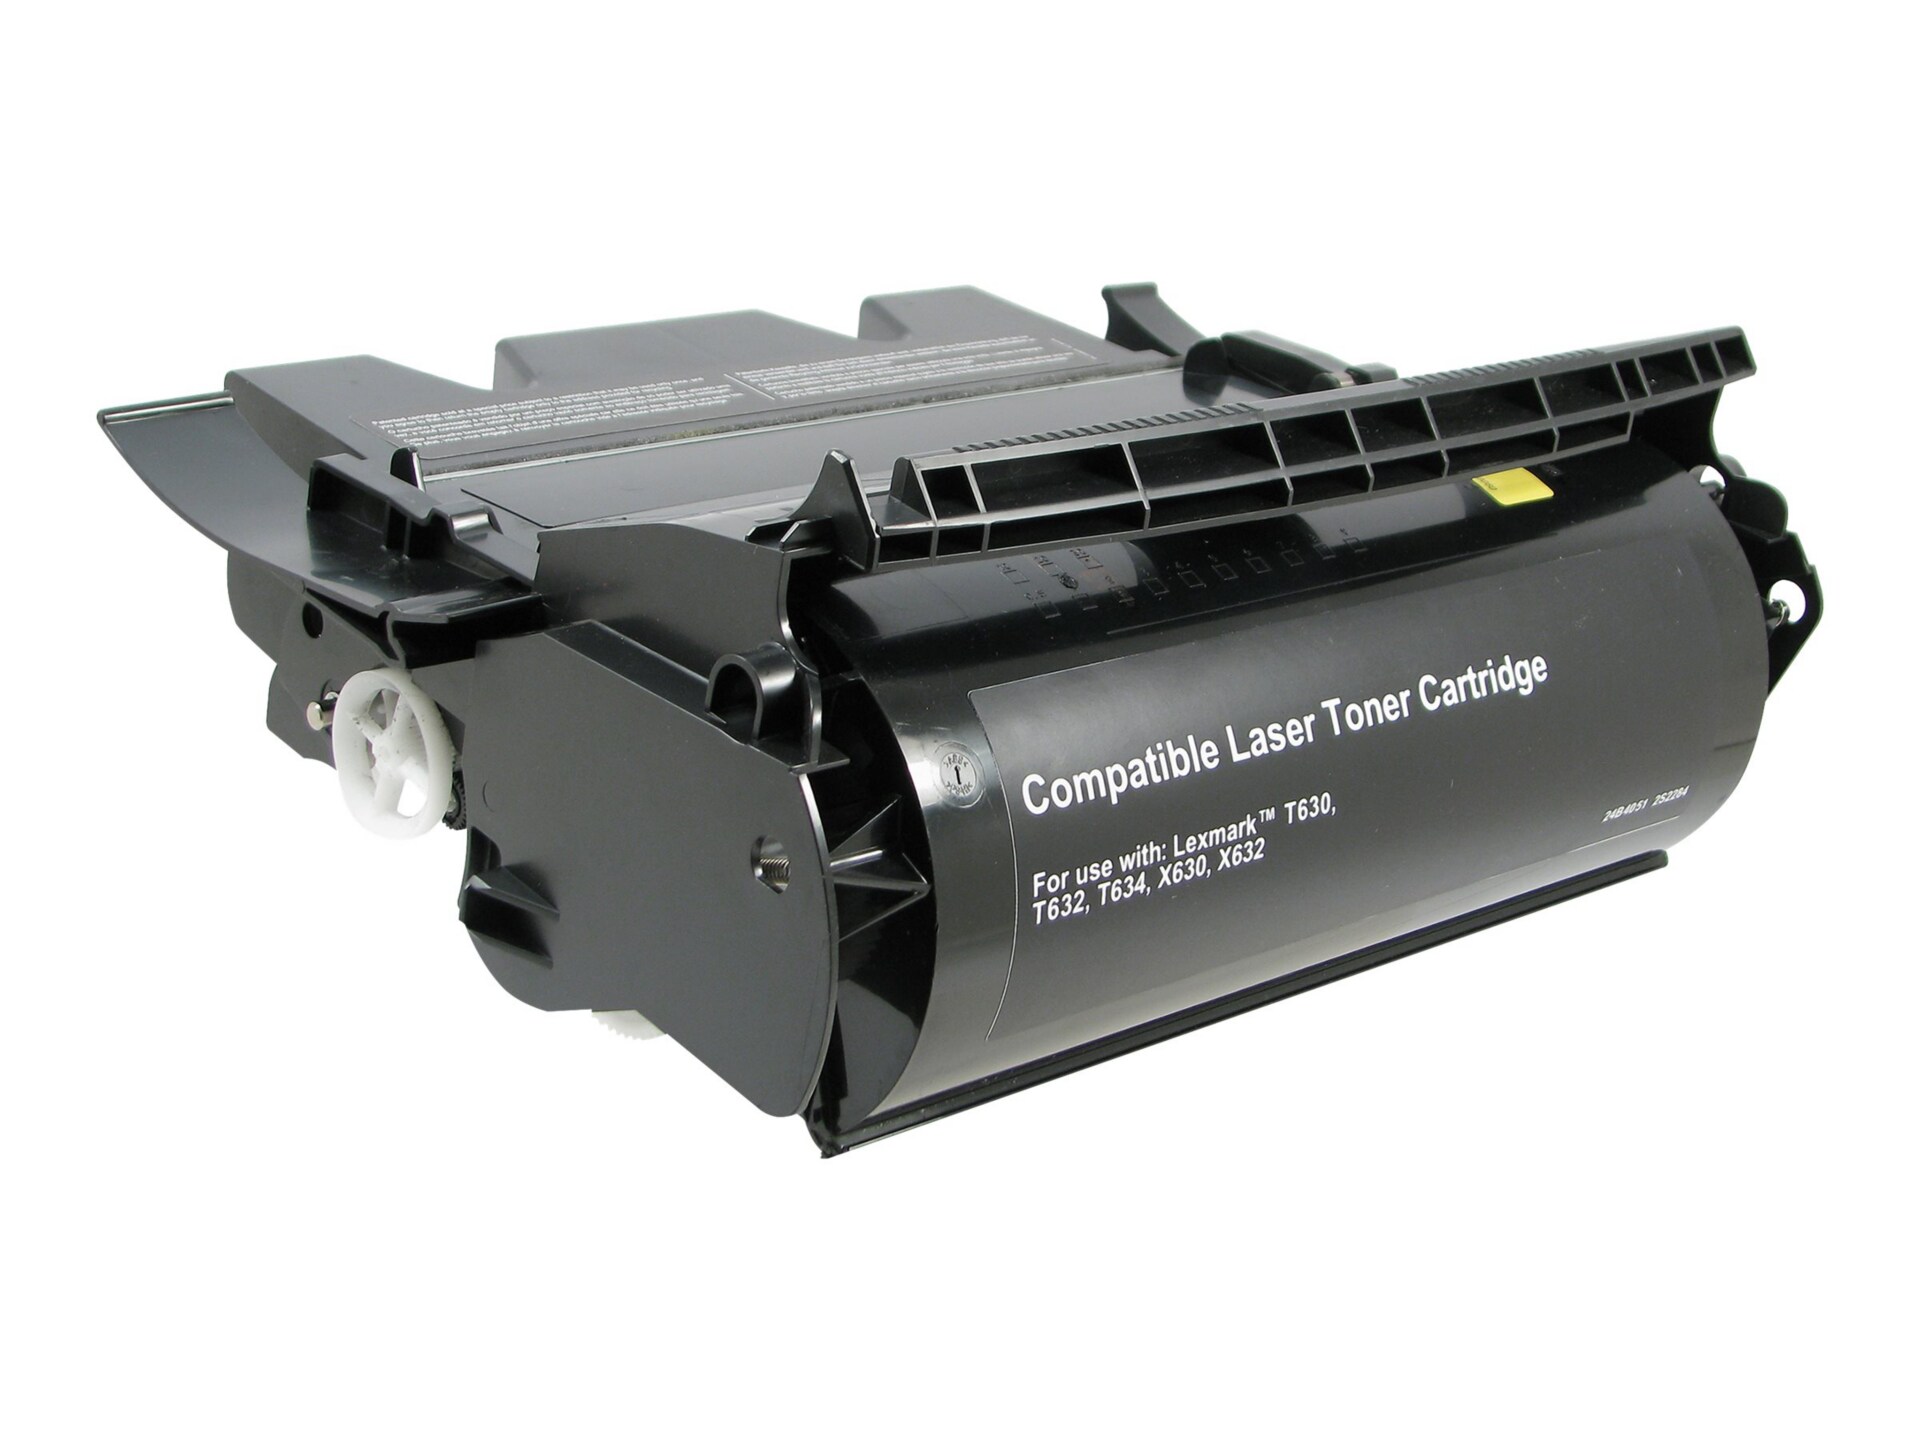 Clover Remanufactured Toner for Lexmark T630/T632, Black, 21,000 page yield